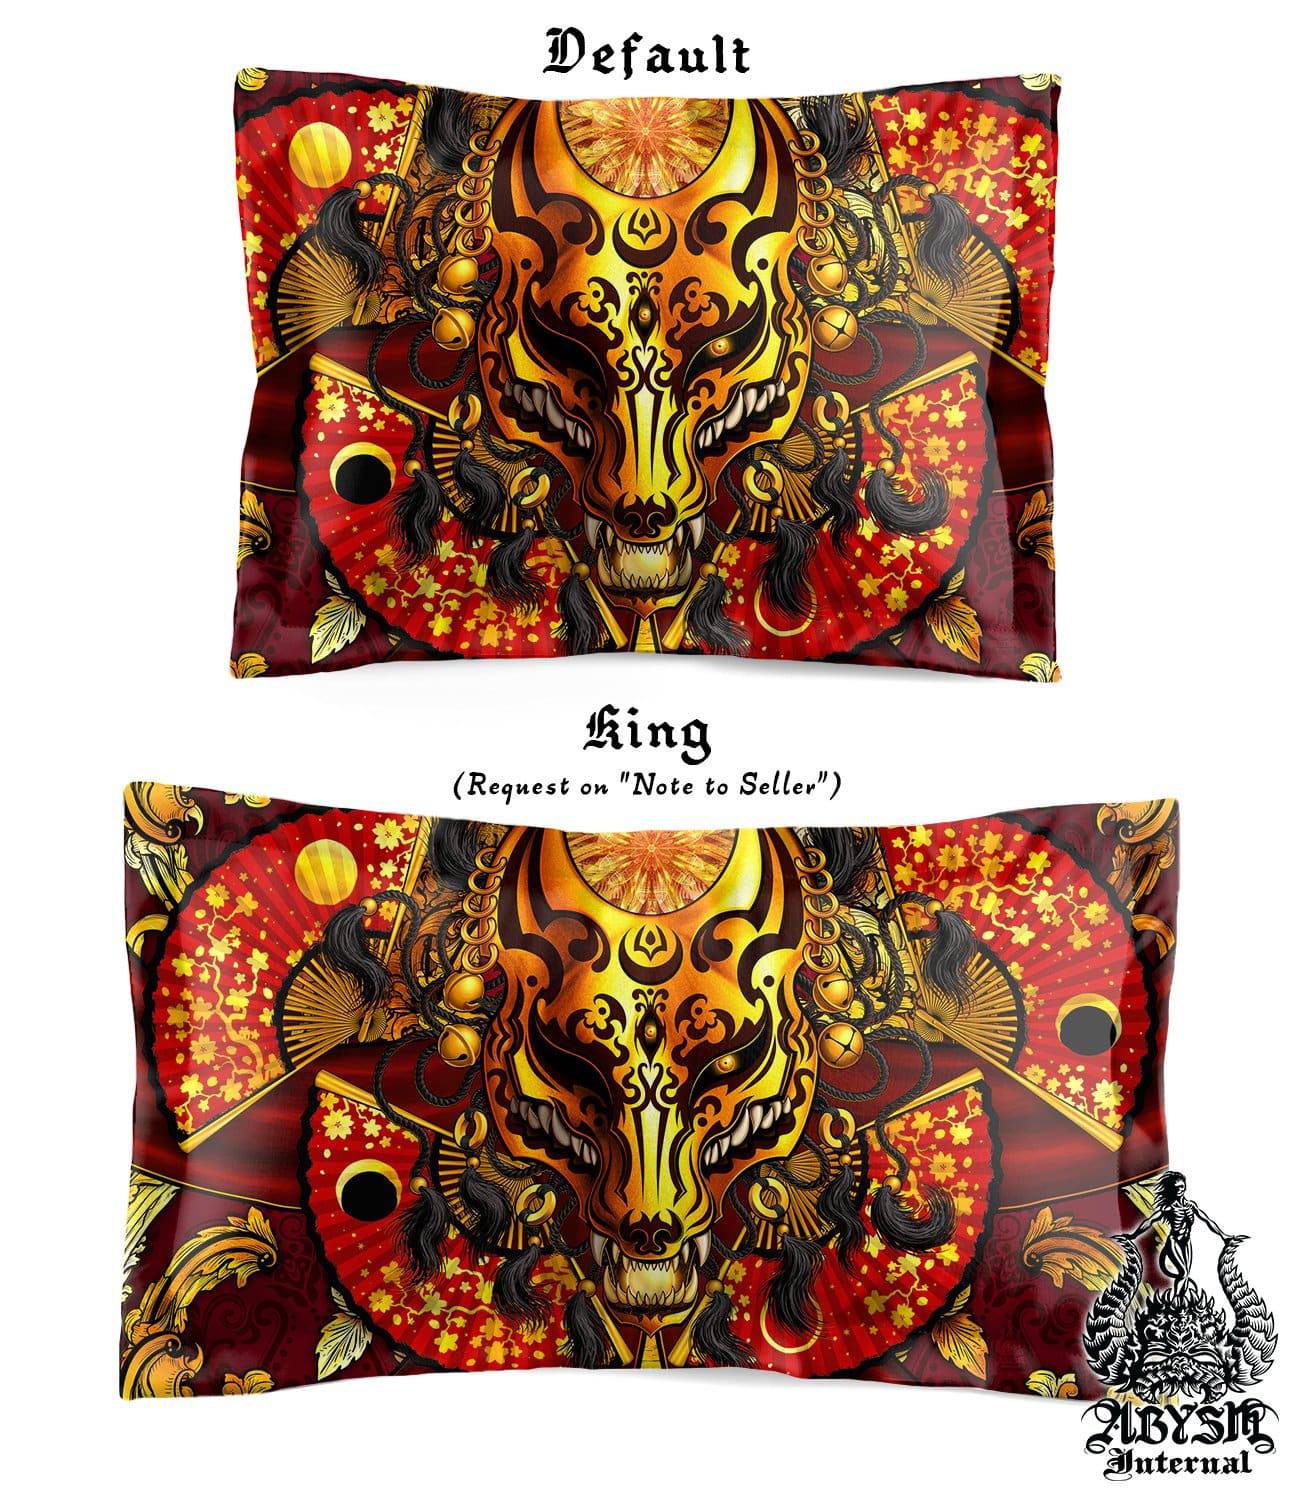 Kitsune Mask Bedding Set, Comforter and Duvet, Gamer Bed Cover and Bedroom Decor, Japanese Fox Mask, Okami, King, Queen and Twin Size - Gold - Abysm Internal